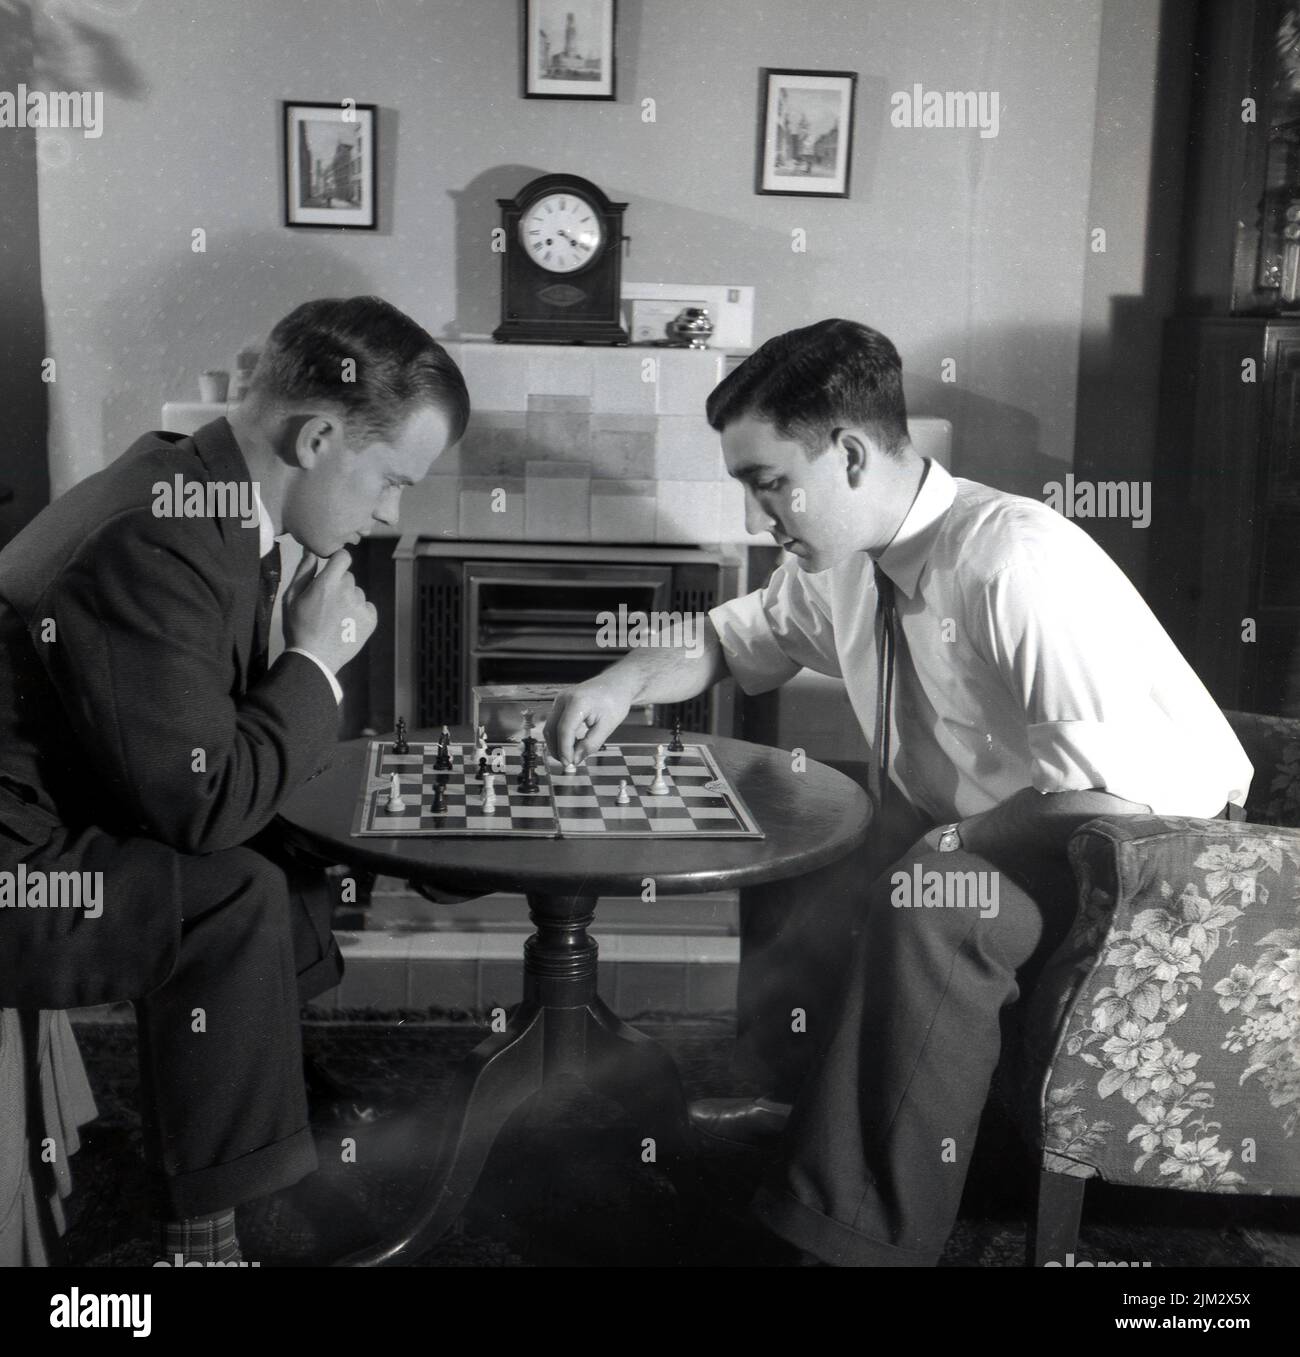 1950s, historical, two men in shirt and ties, sitting at small table in a front room playing chess, England, UK. Stock Photo